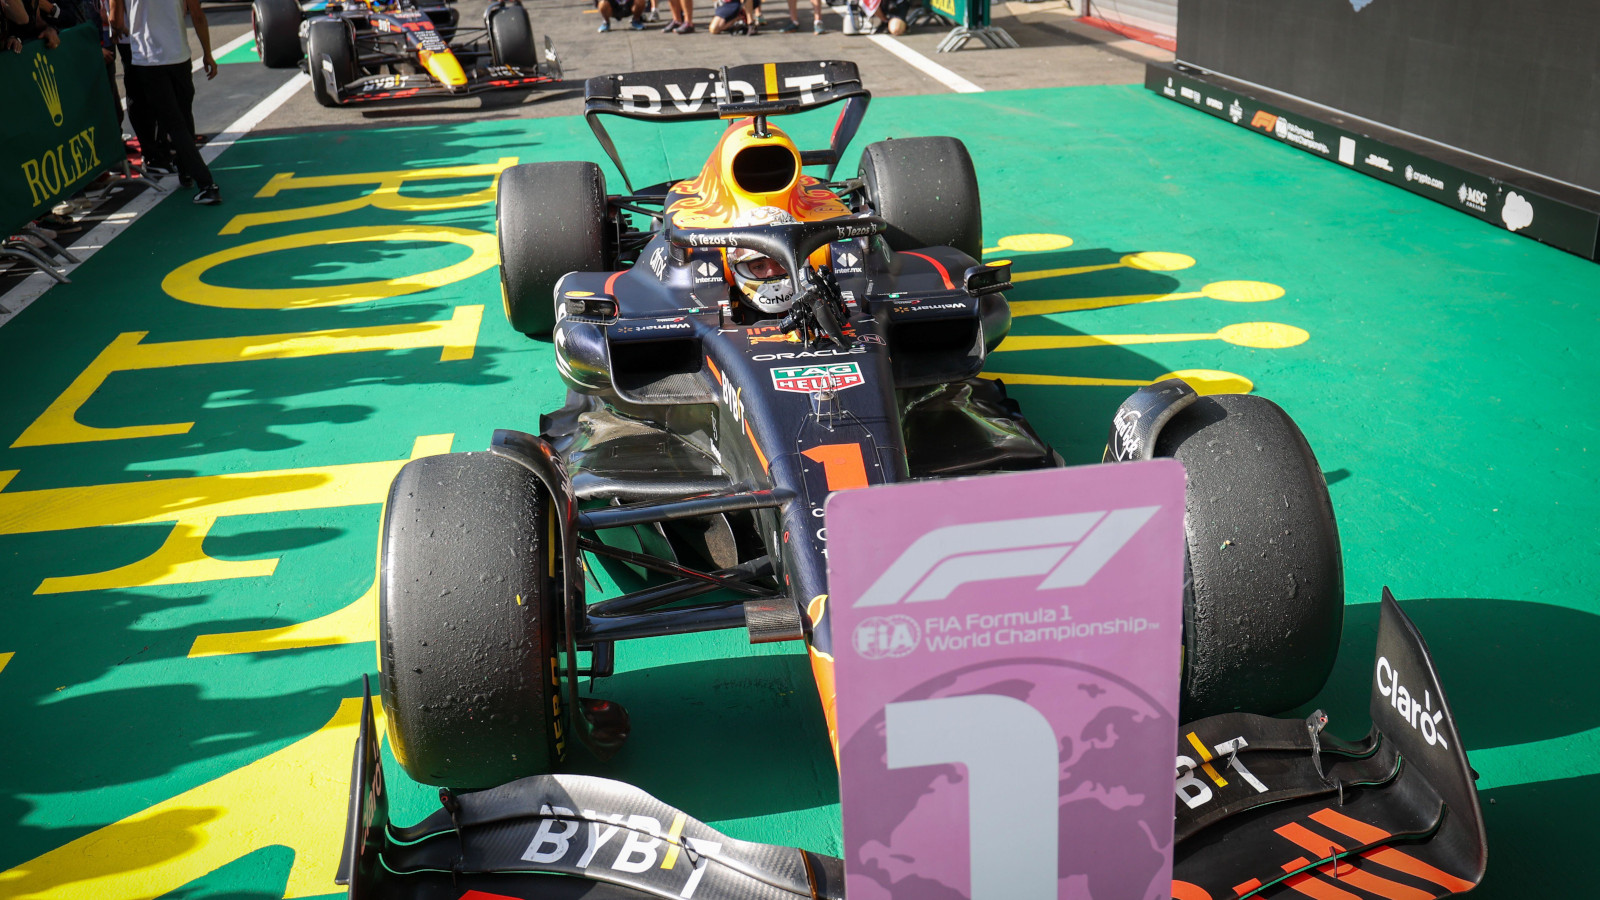 Max Verstappen pulls into parc ferme in front of the P1. Belgium August 2022